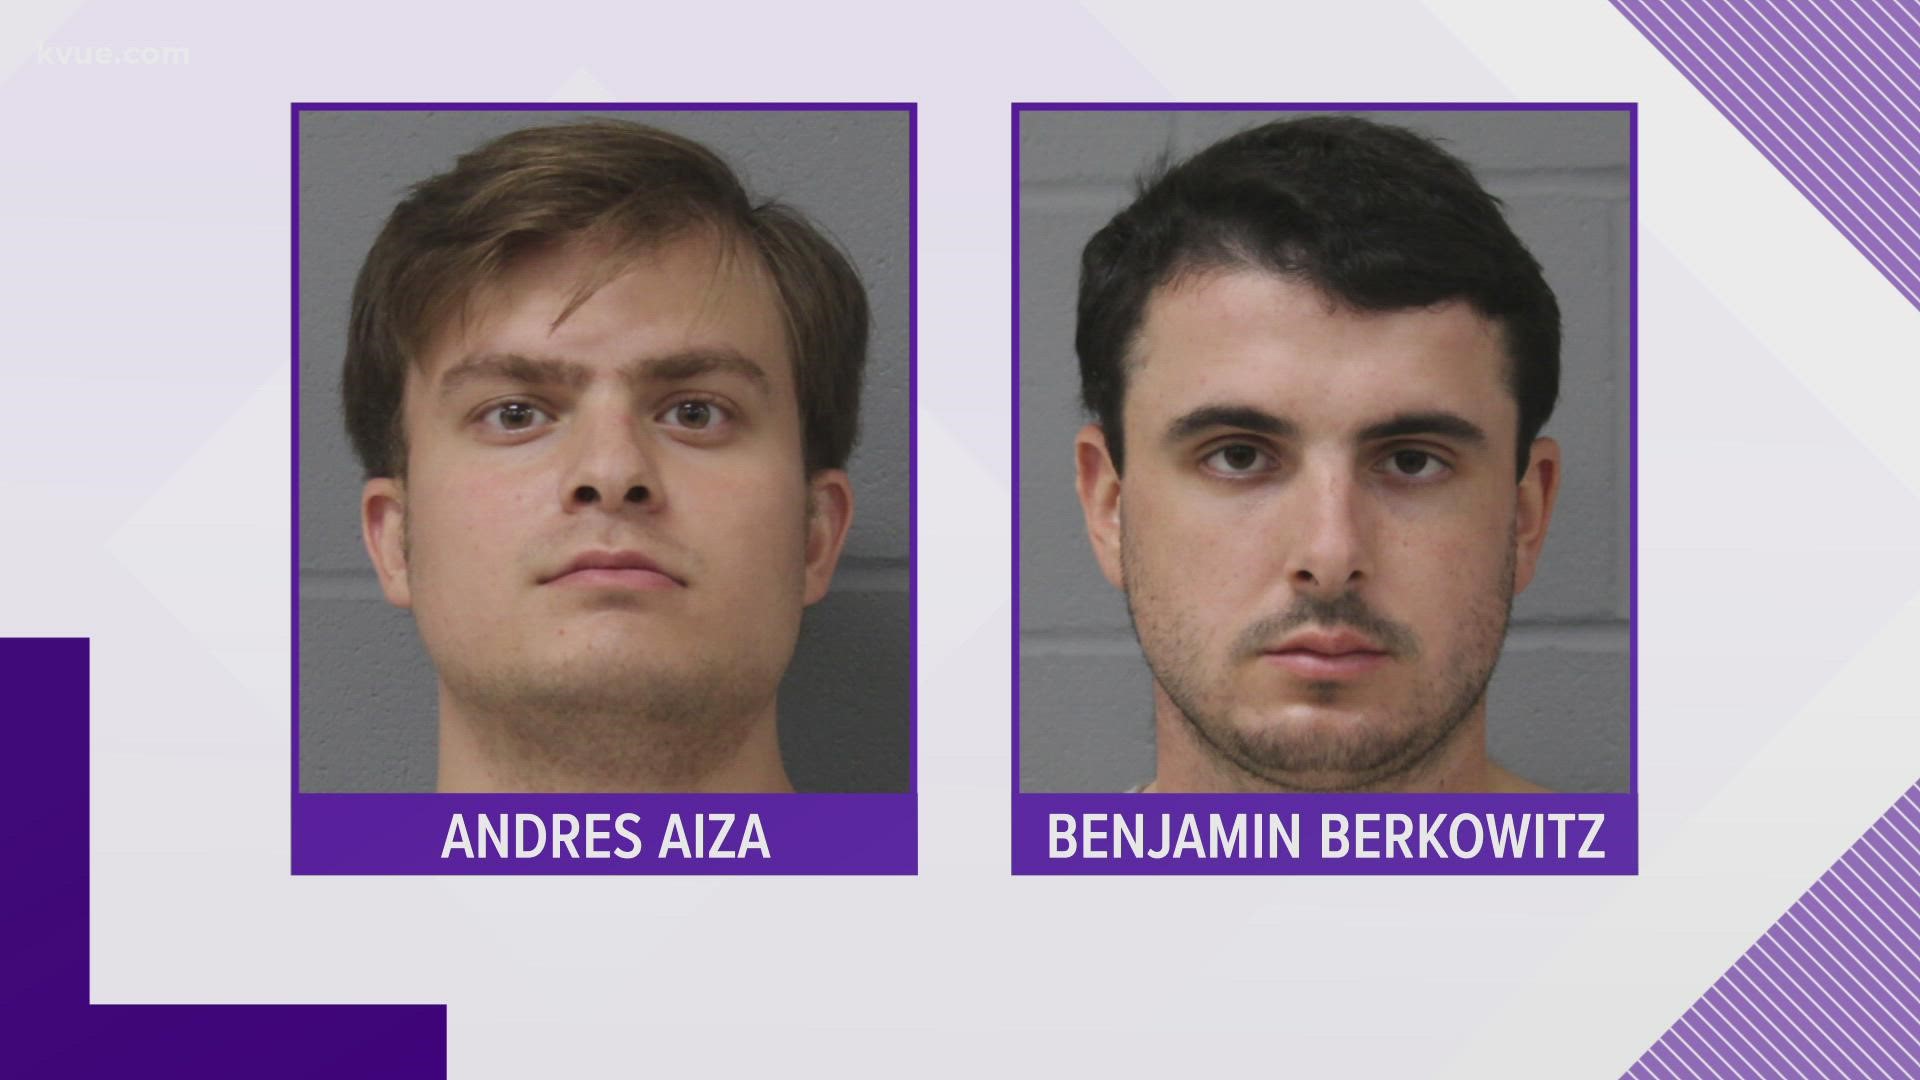 Benjamin Berkowitz, 22, and Andres Aiza, 21, were booked into the Travis County Jail on Monday afternoon.